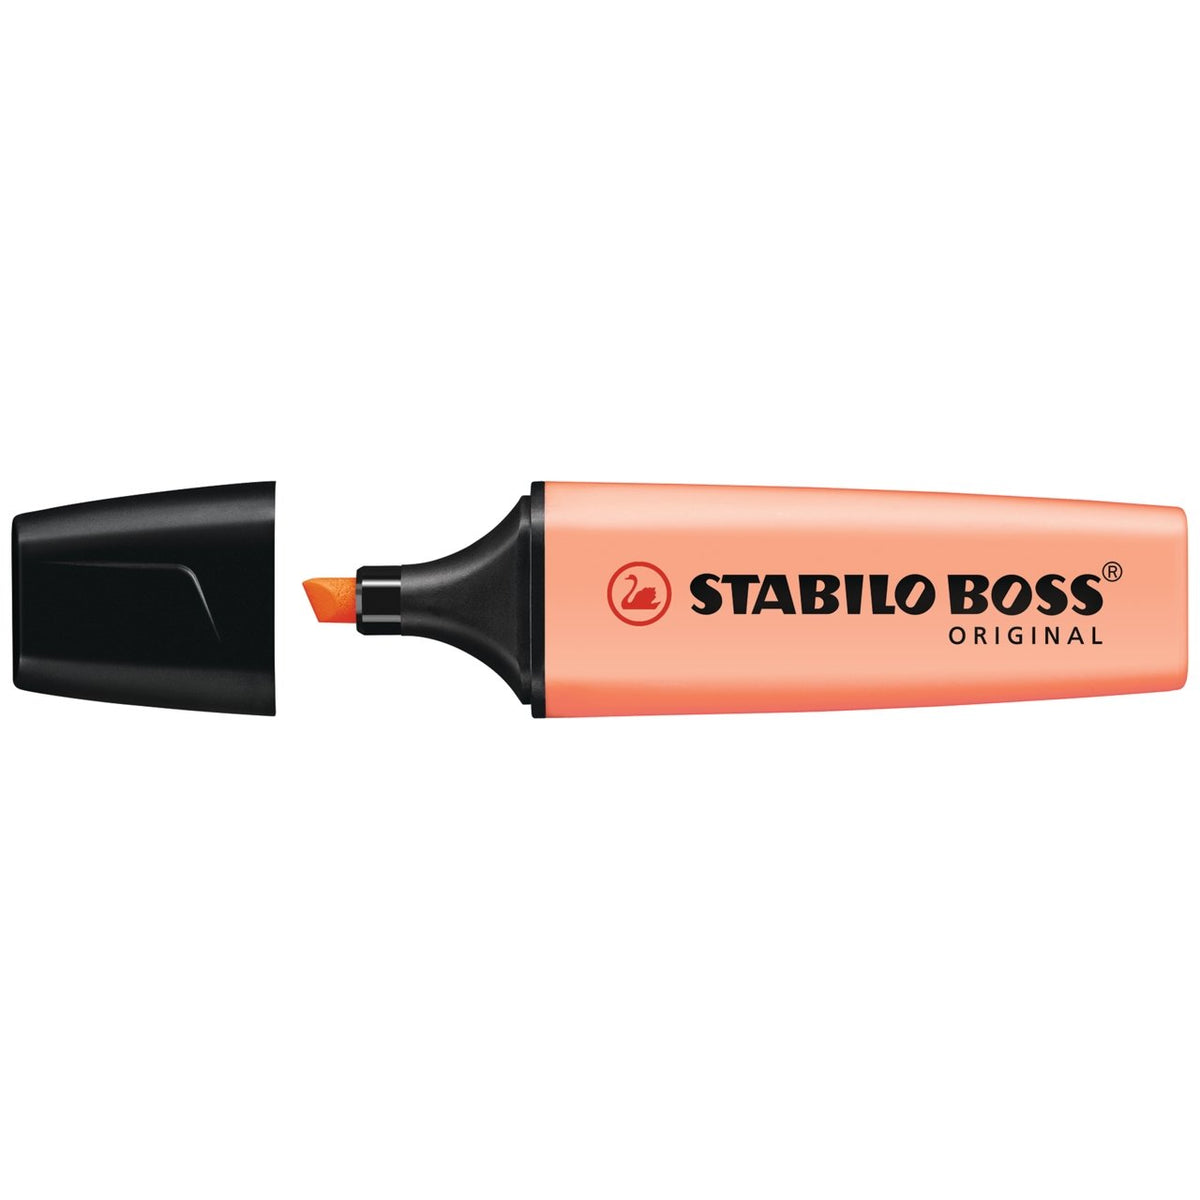 Highlighter - STABILO BOSS ORIGINAL Pastel - Pack of 6 - Milky Yellow,  Creamy Peach, Pink Blush, Lilac Haze, Hint of Mint, Touch of Turquoise